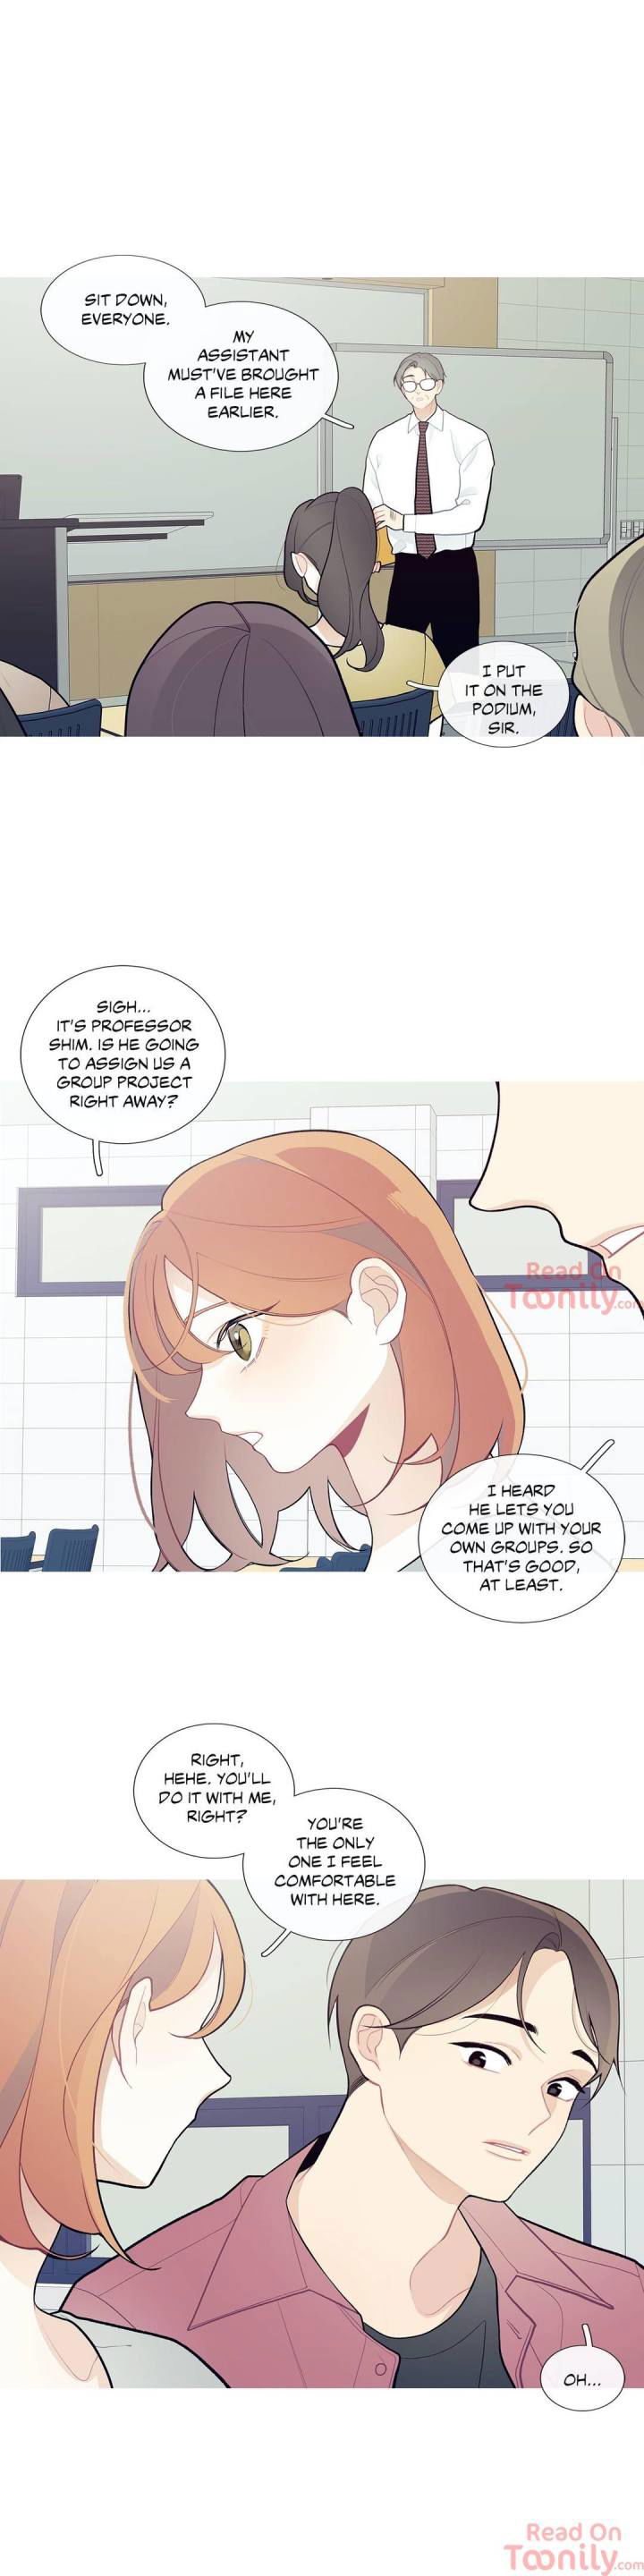 whats-going-on-chap-31-14